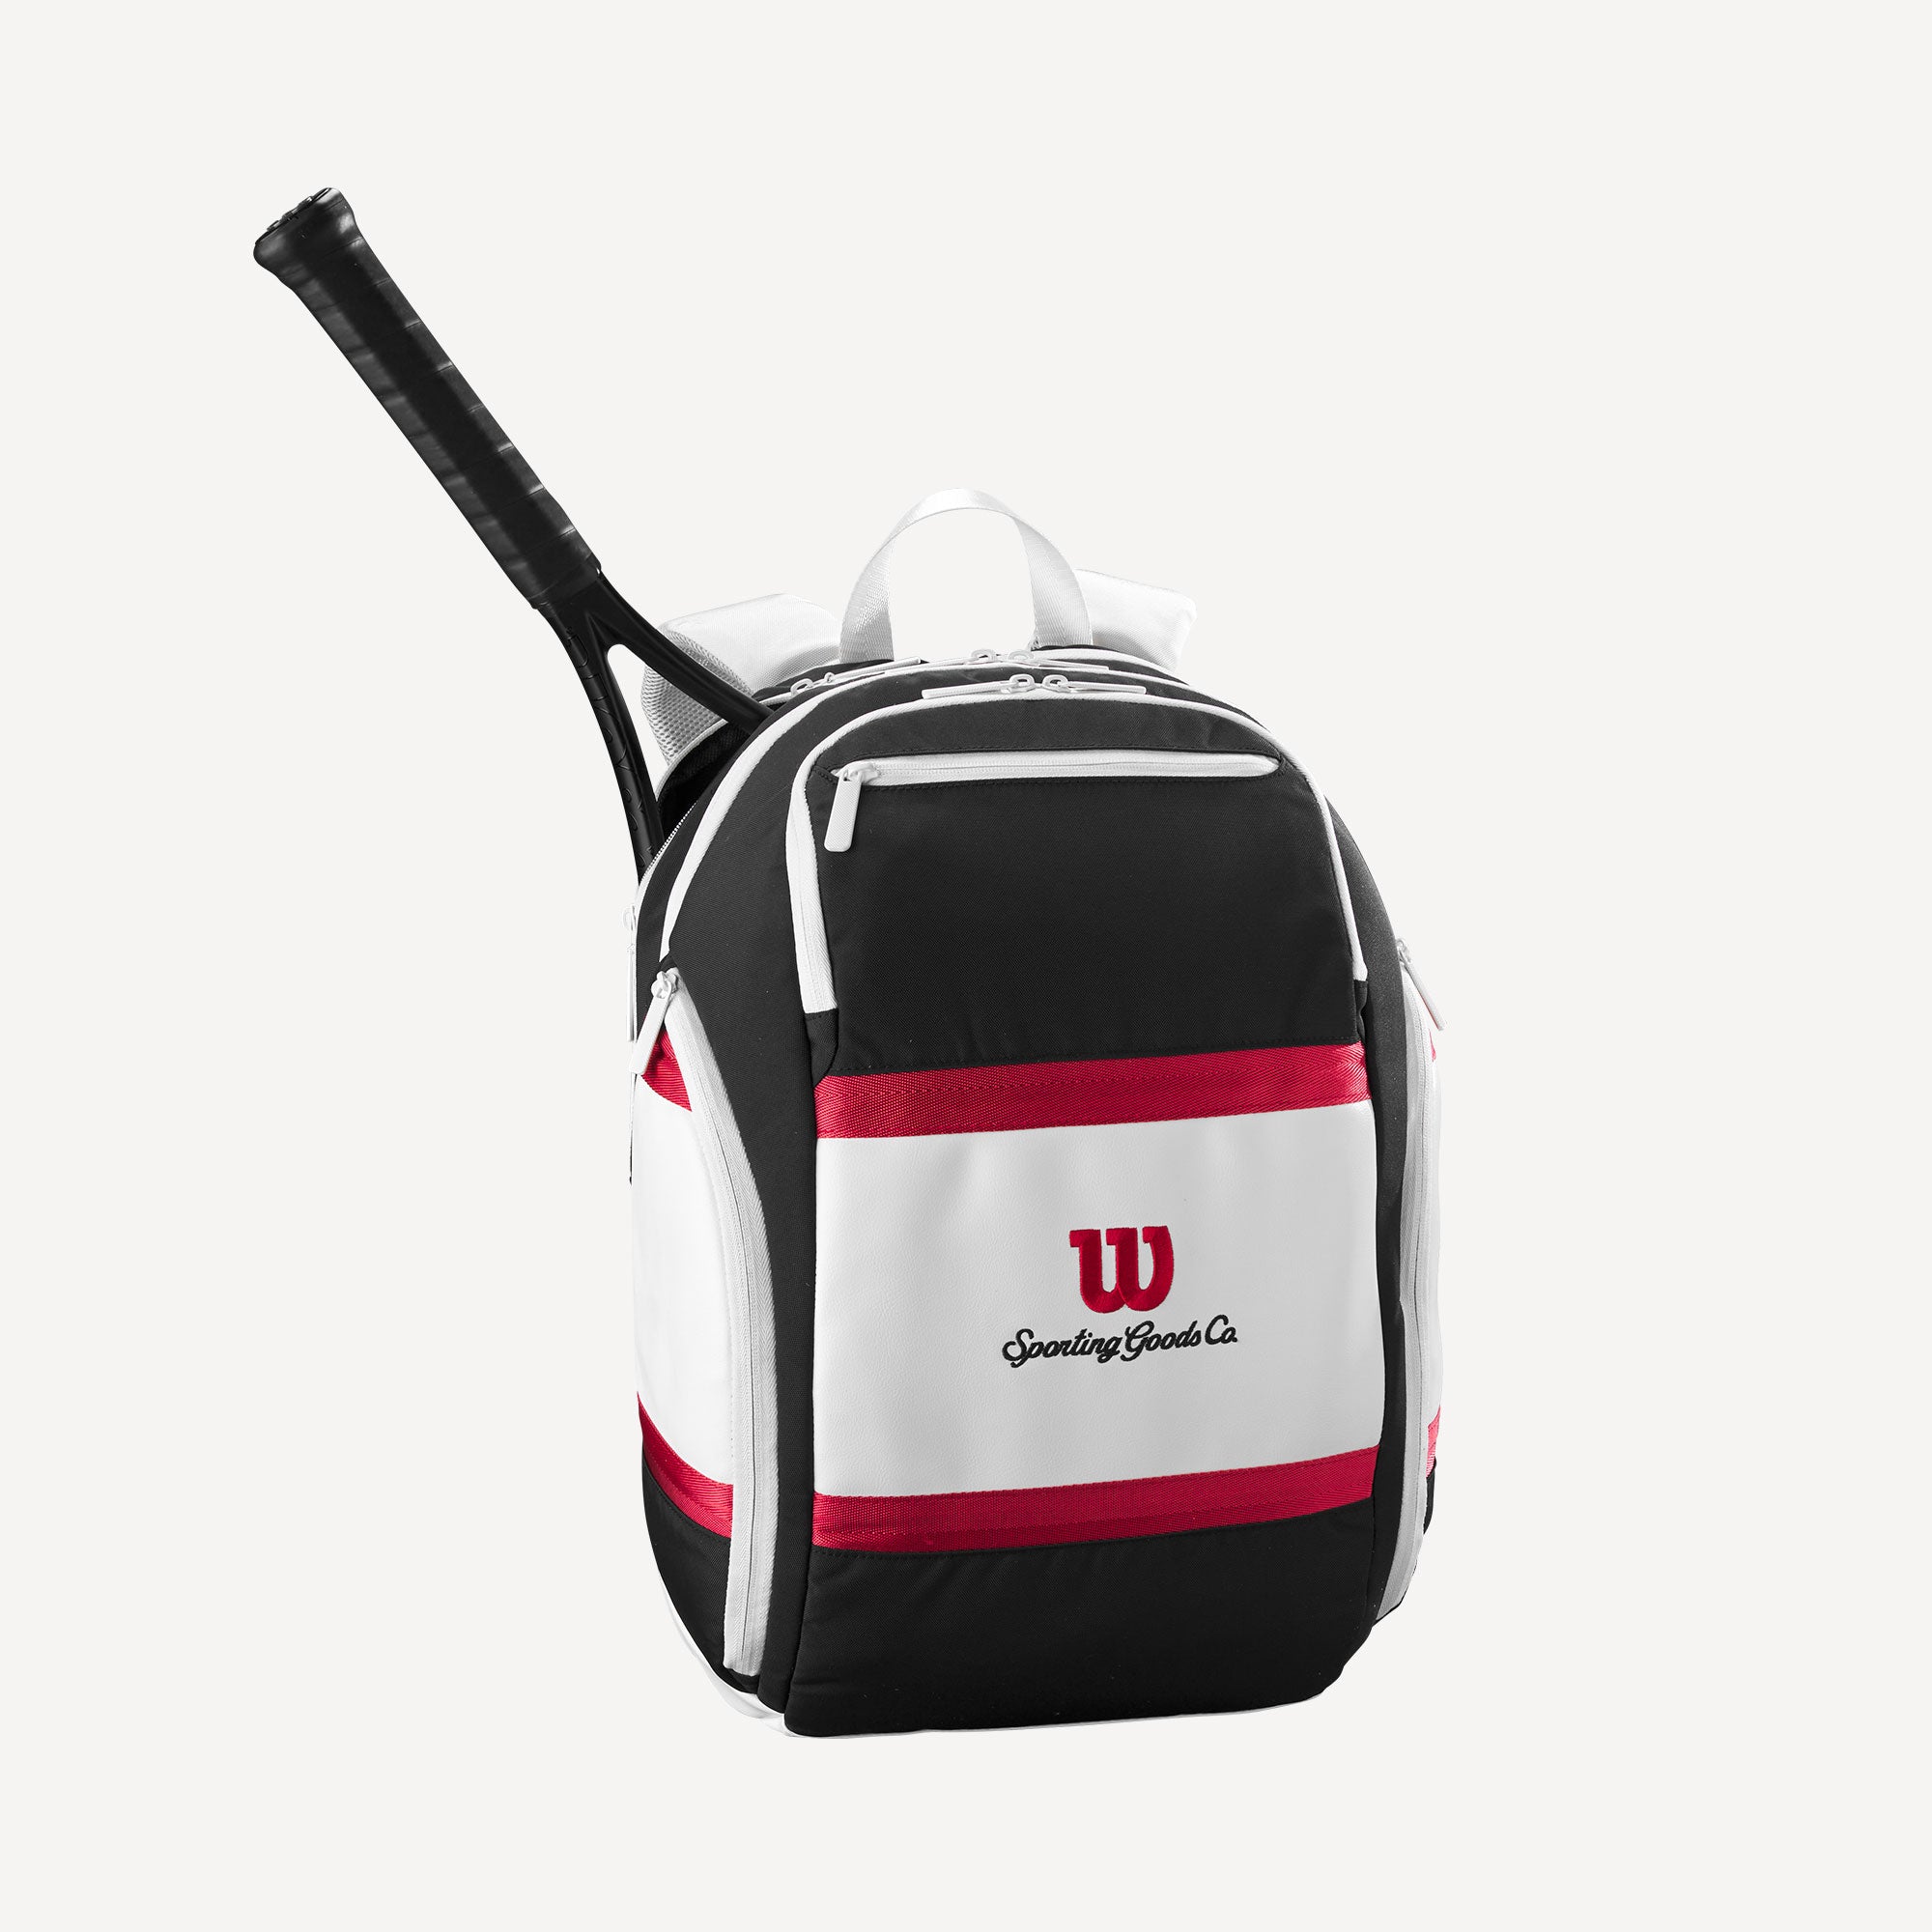 Wilson Courage Collection Tennis Backpack - Black/White/Red (2)